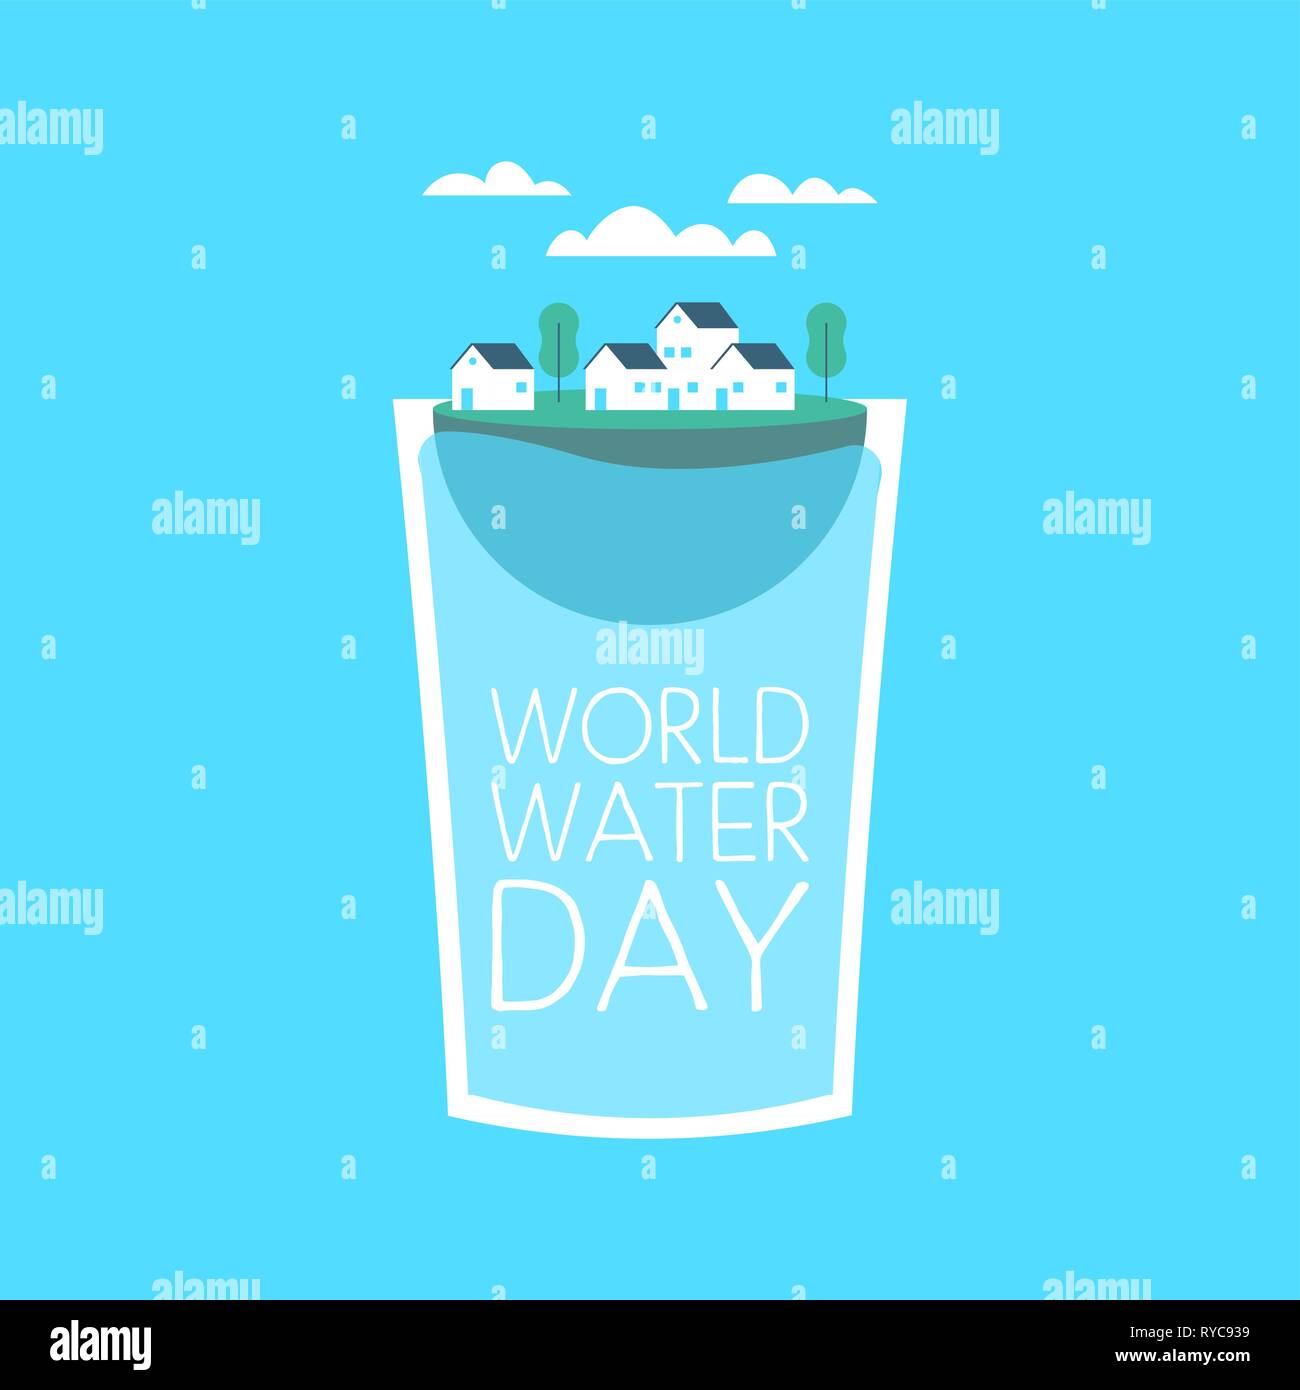 World Water Day illustration for climate change and environment care concept. Small city floating inside drinking glass. Stock Vector